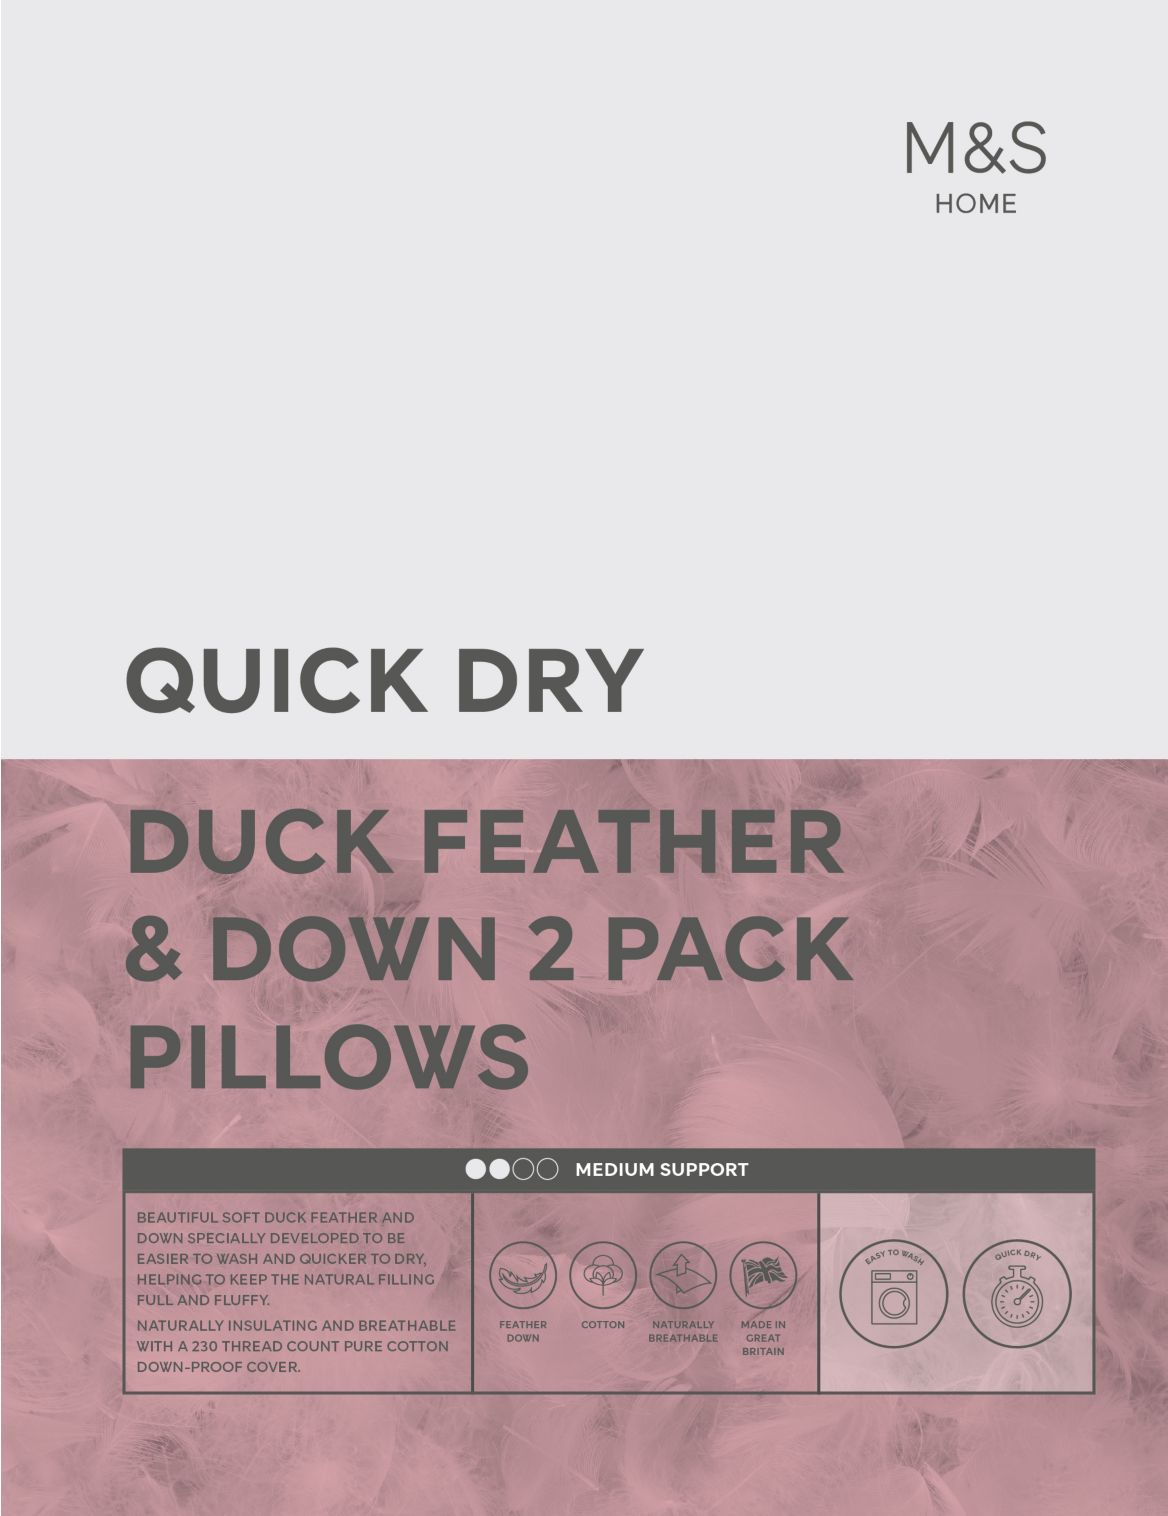 2 Pack Duck Feather & Down Medium Pillows white